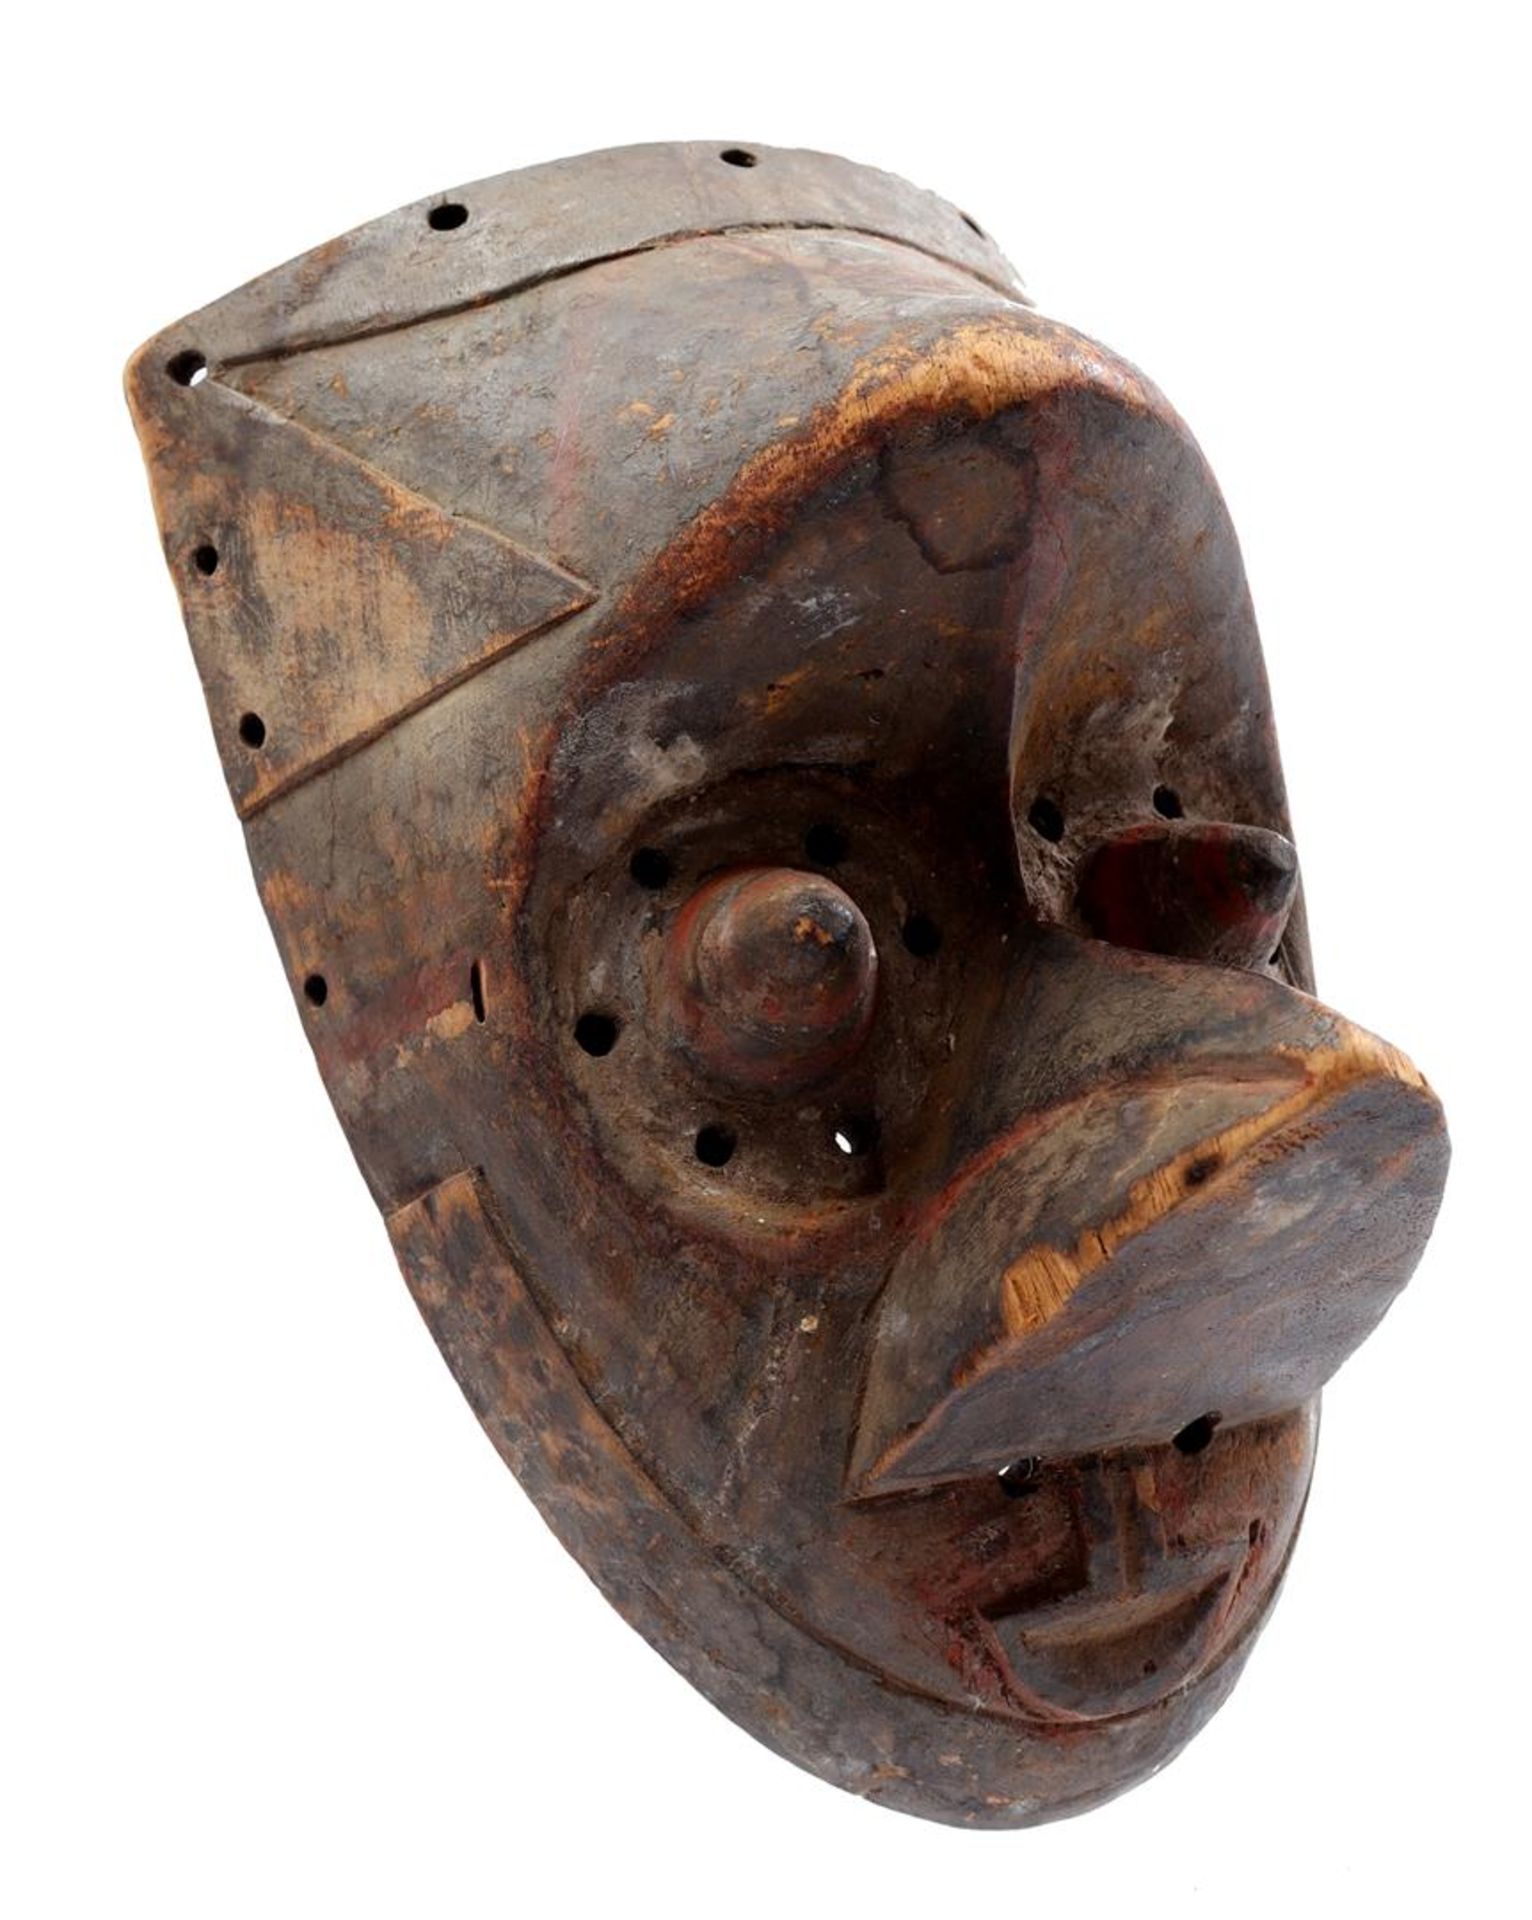 Wooden ceremonial mask with remains of polychrome